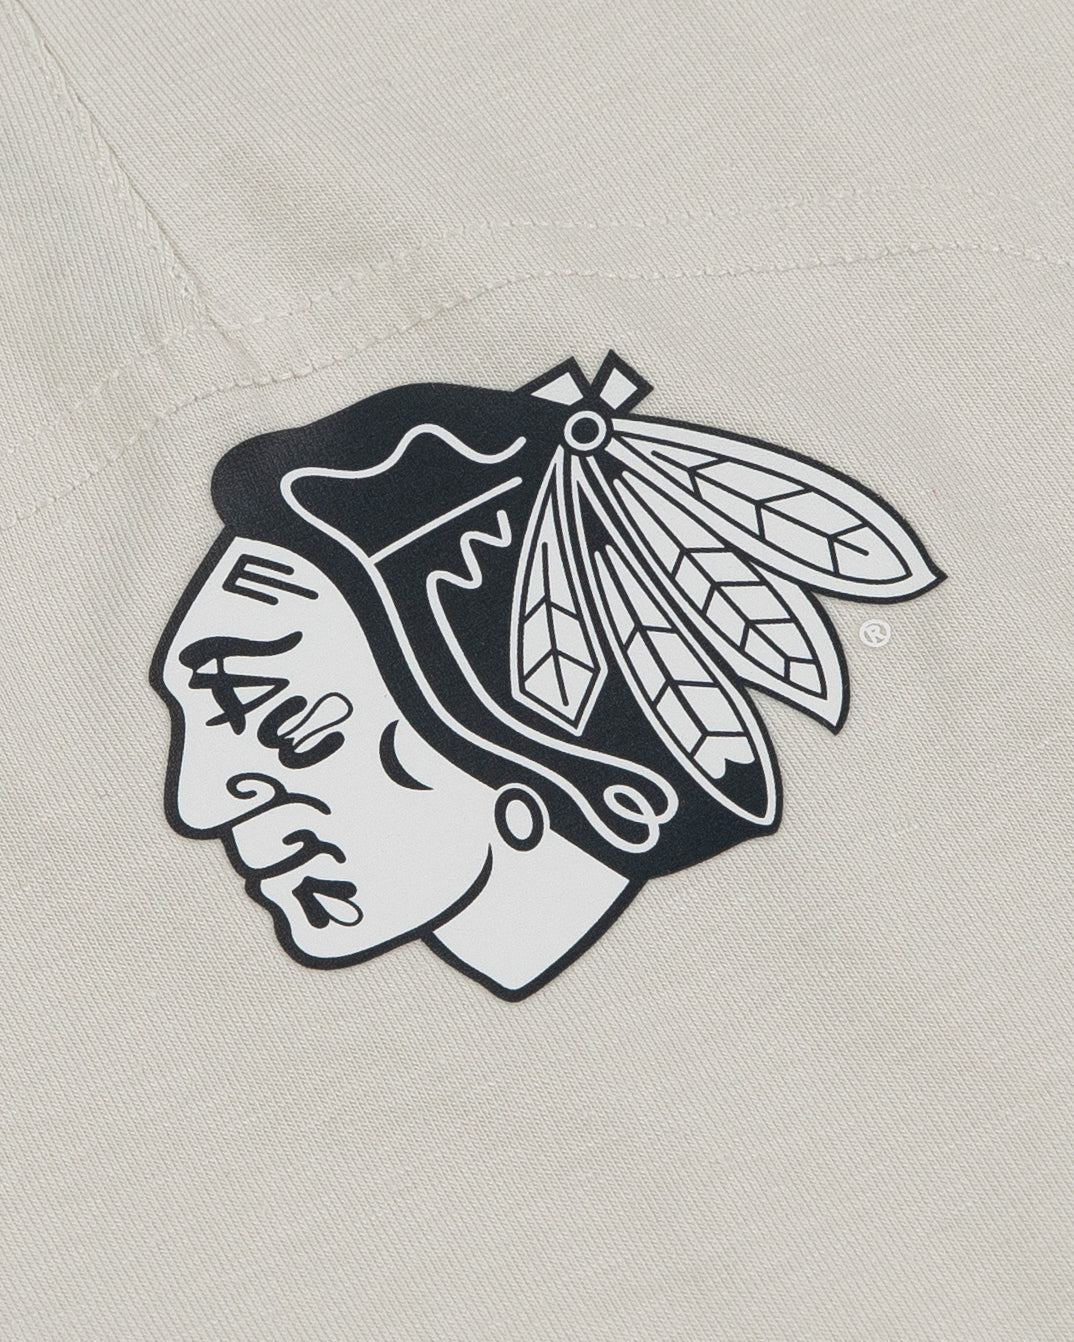 off white lululemon tank top with Chicago Blackhawks primary logo on back - detail lay flat